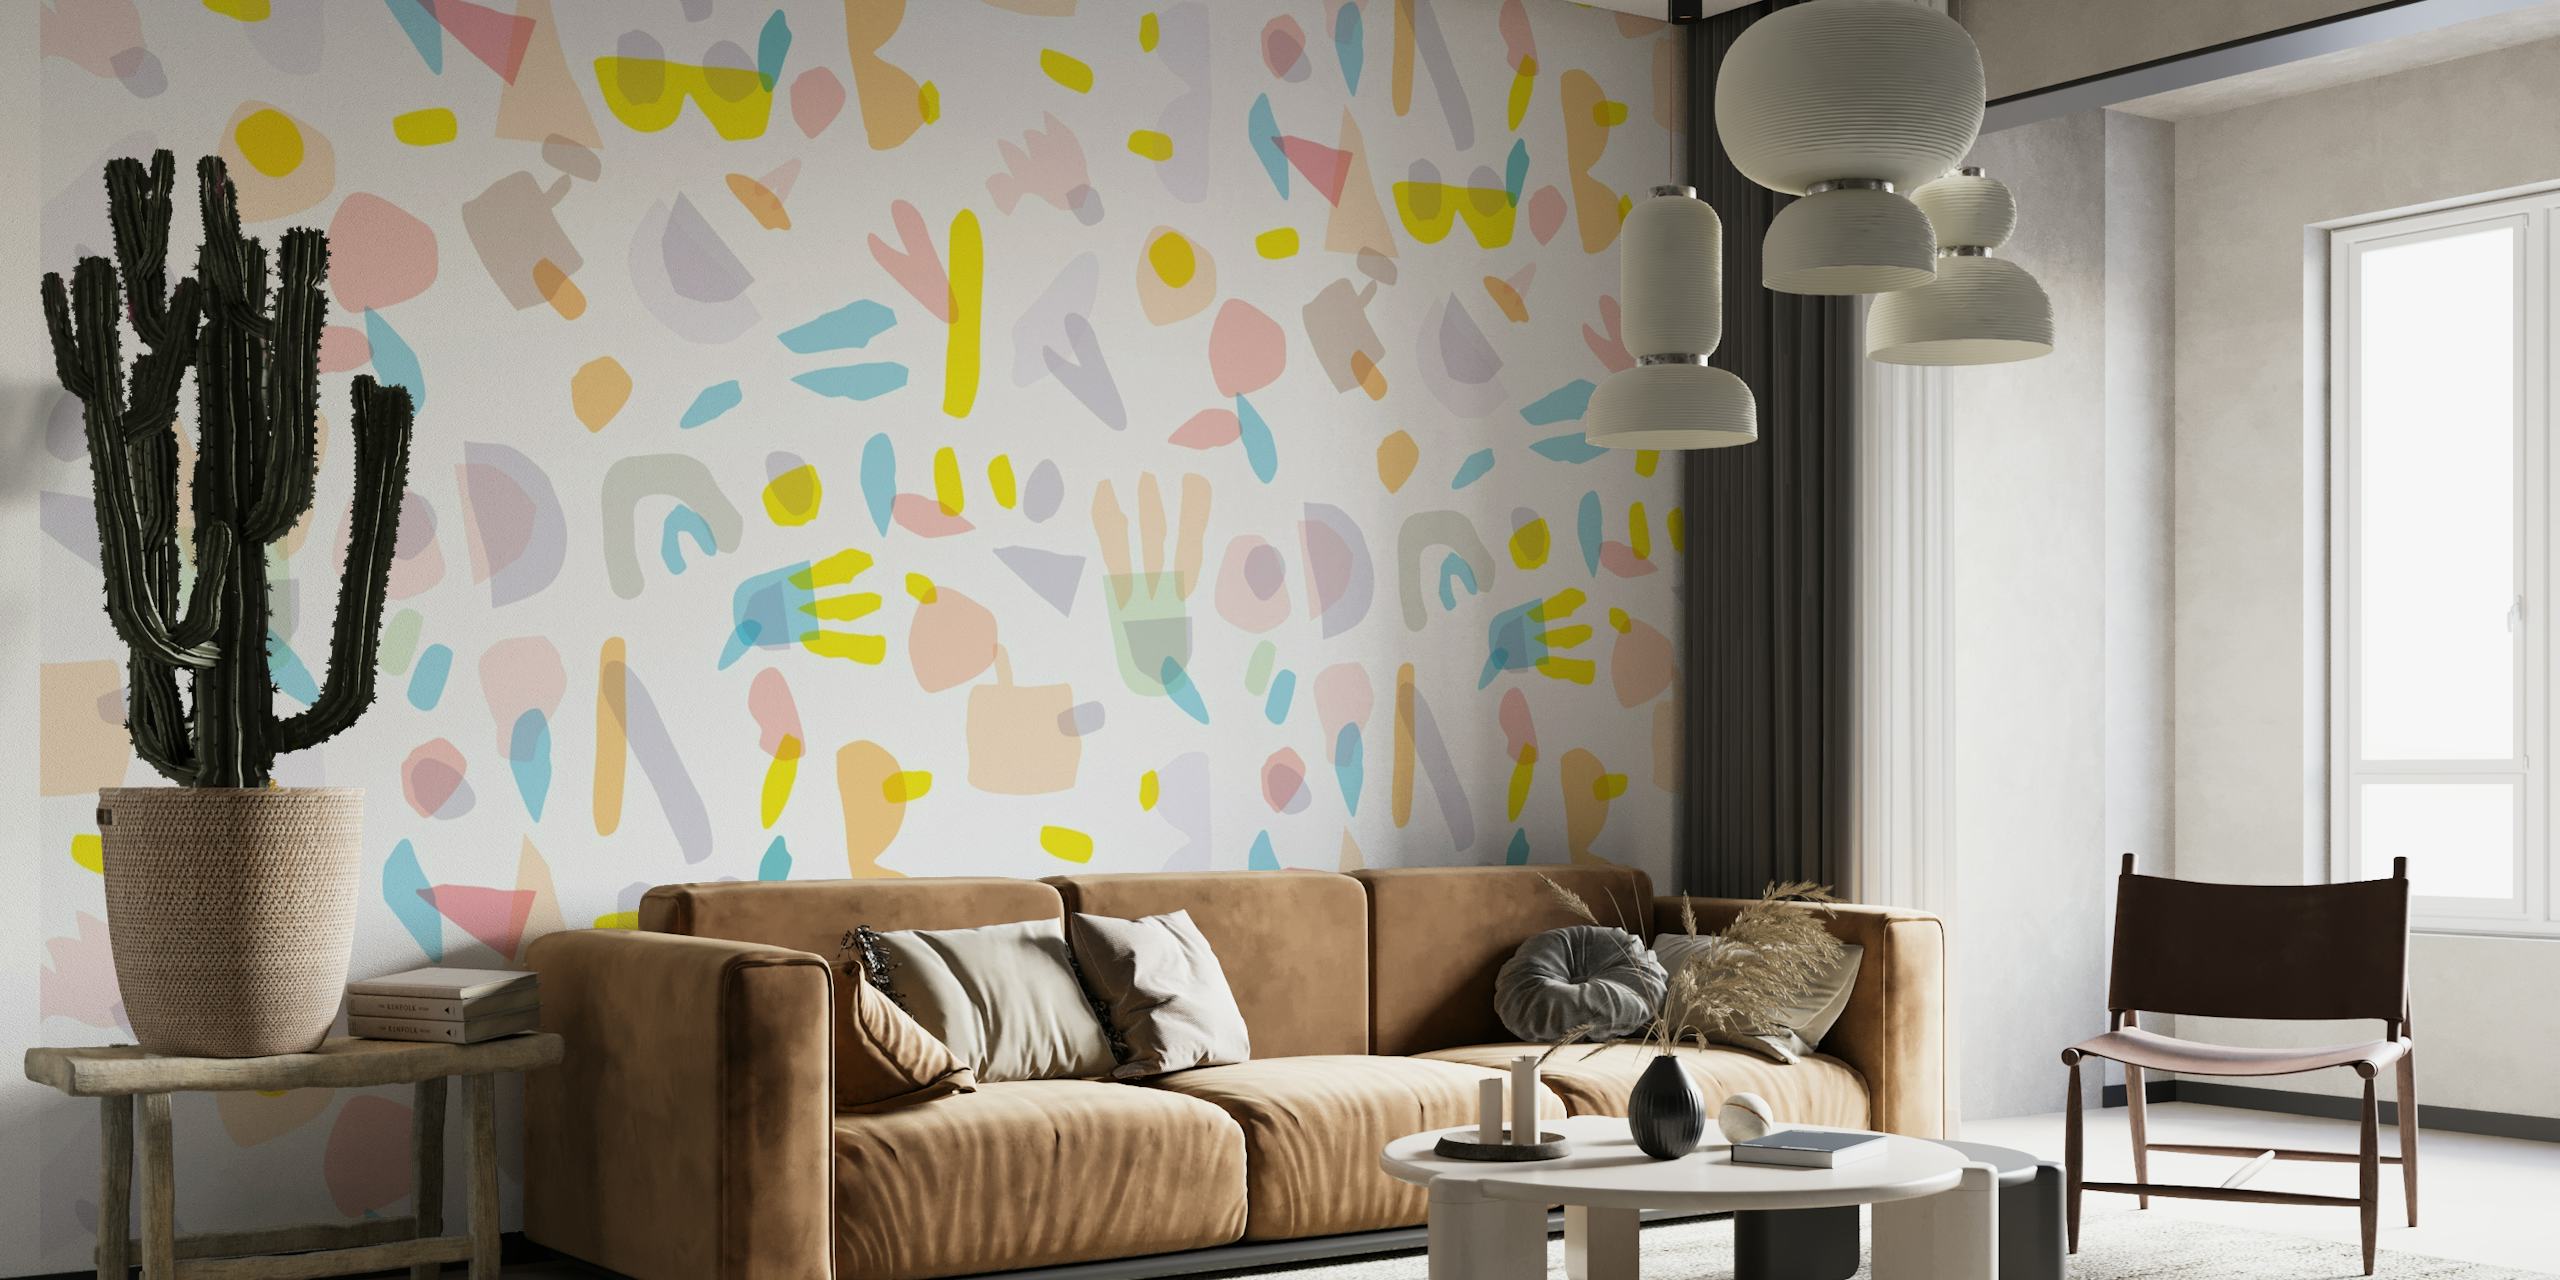 Abstract shapes and doodle art wall mural in pastel colors